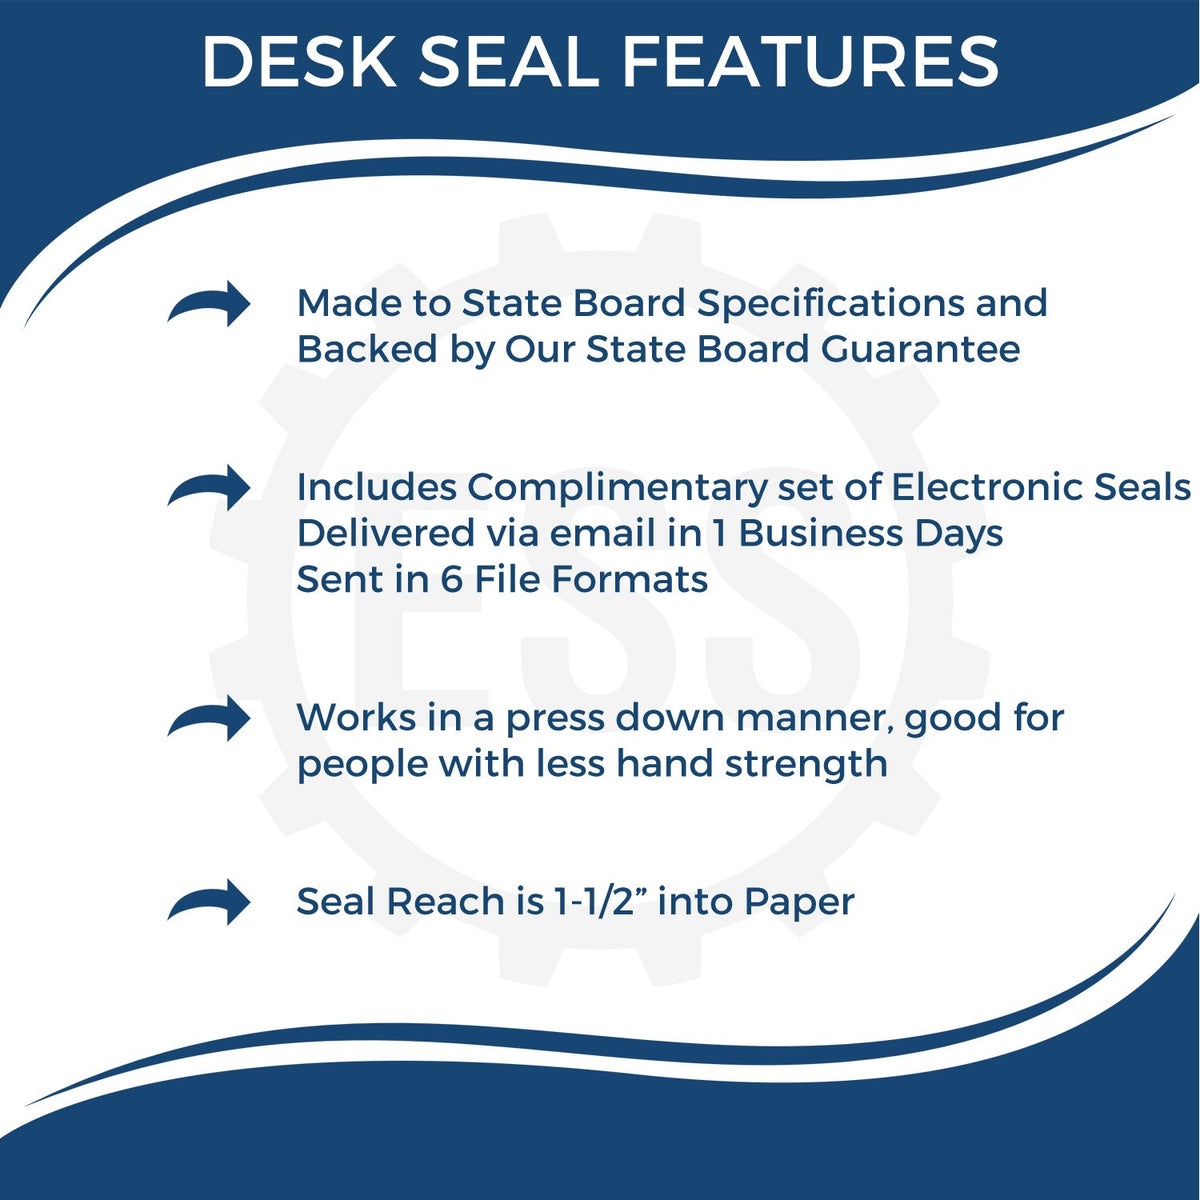 A picture of an infographic highlighting the selling points for the California Engineer Desk Seal